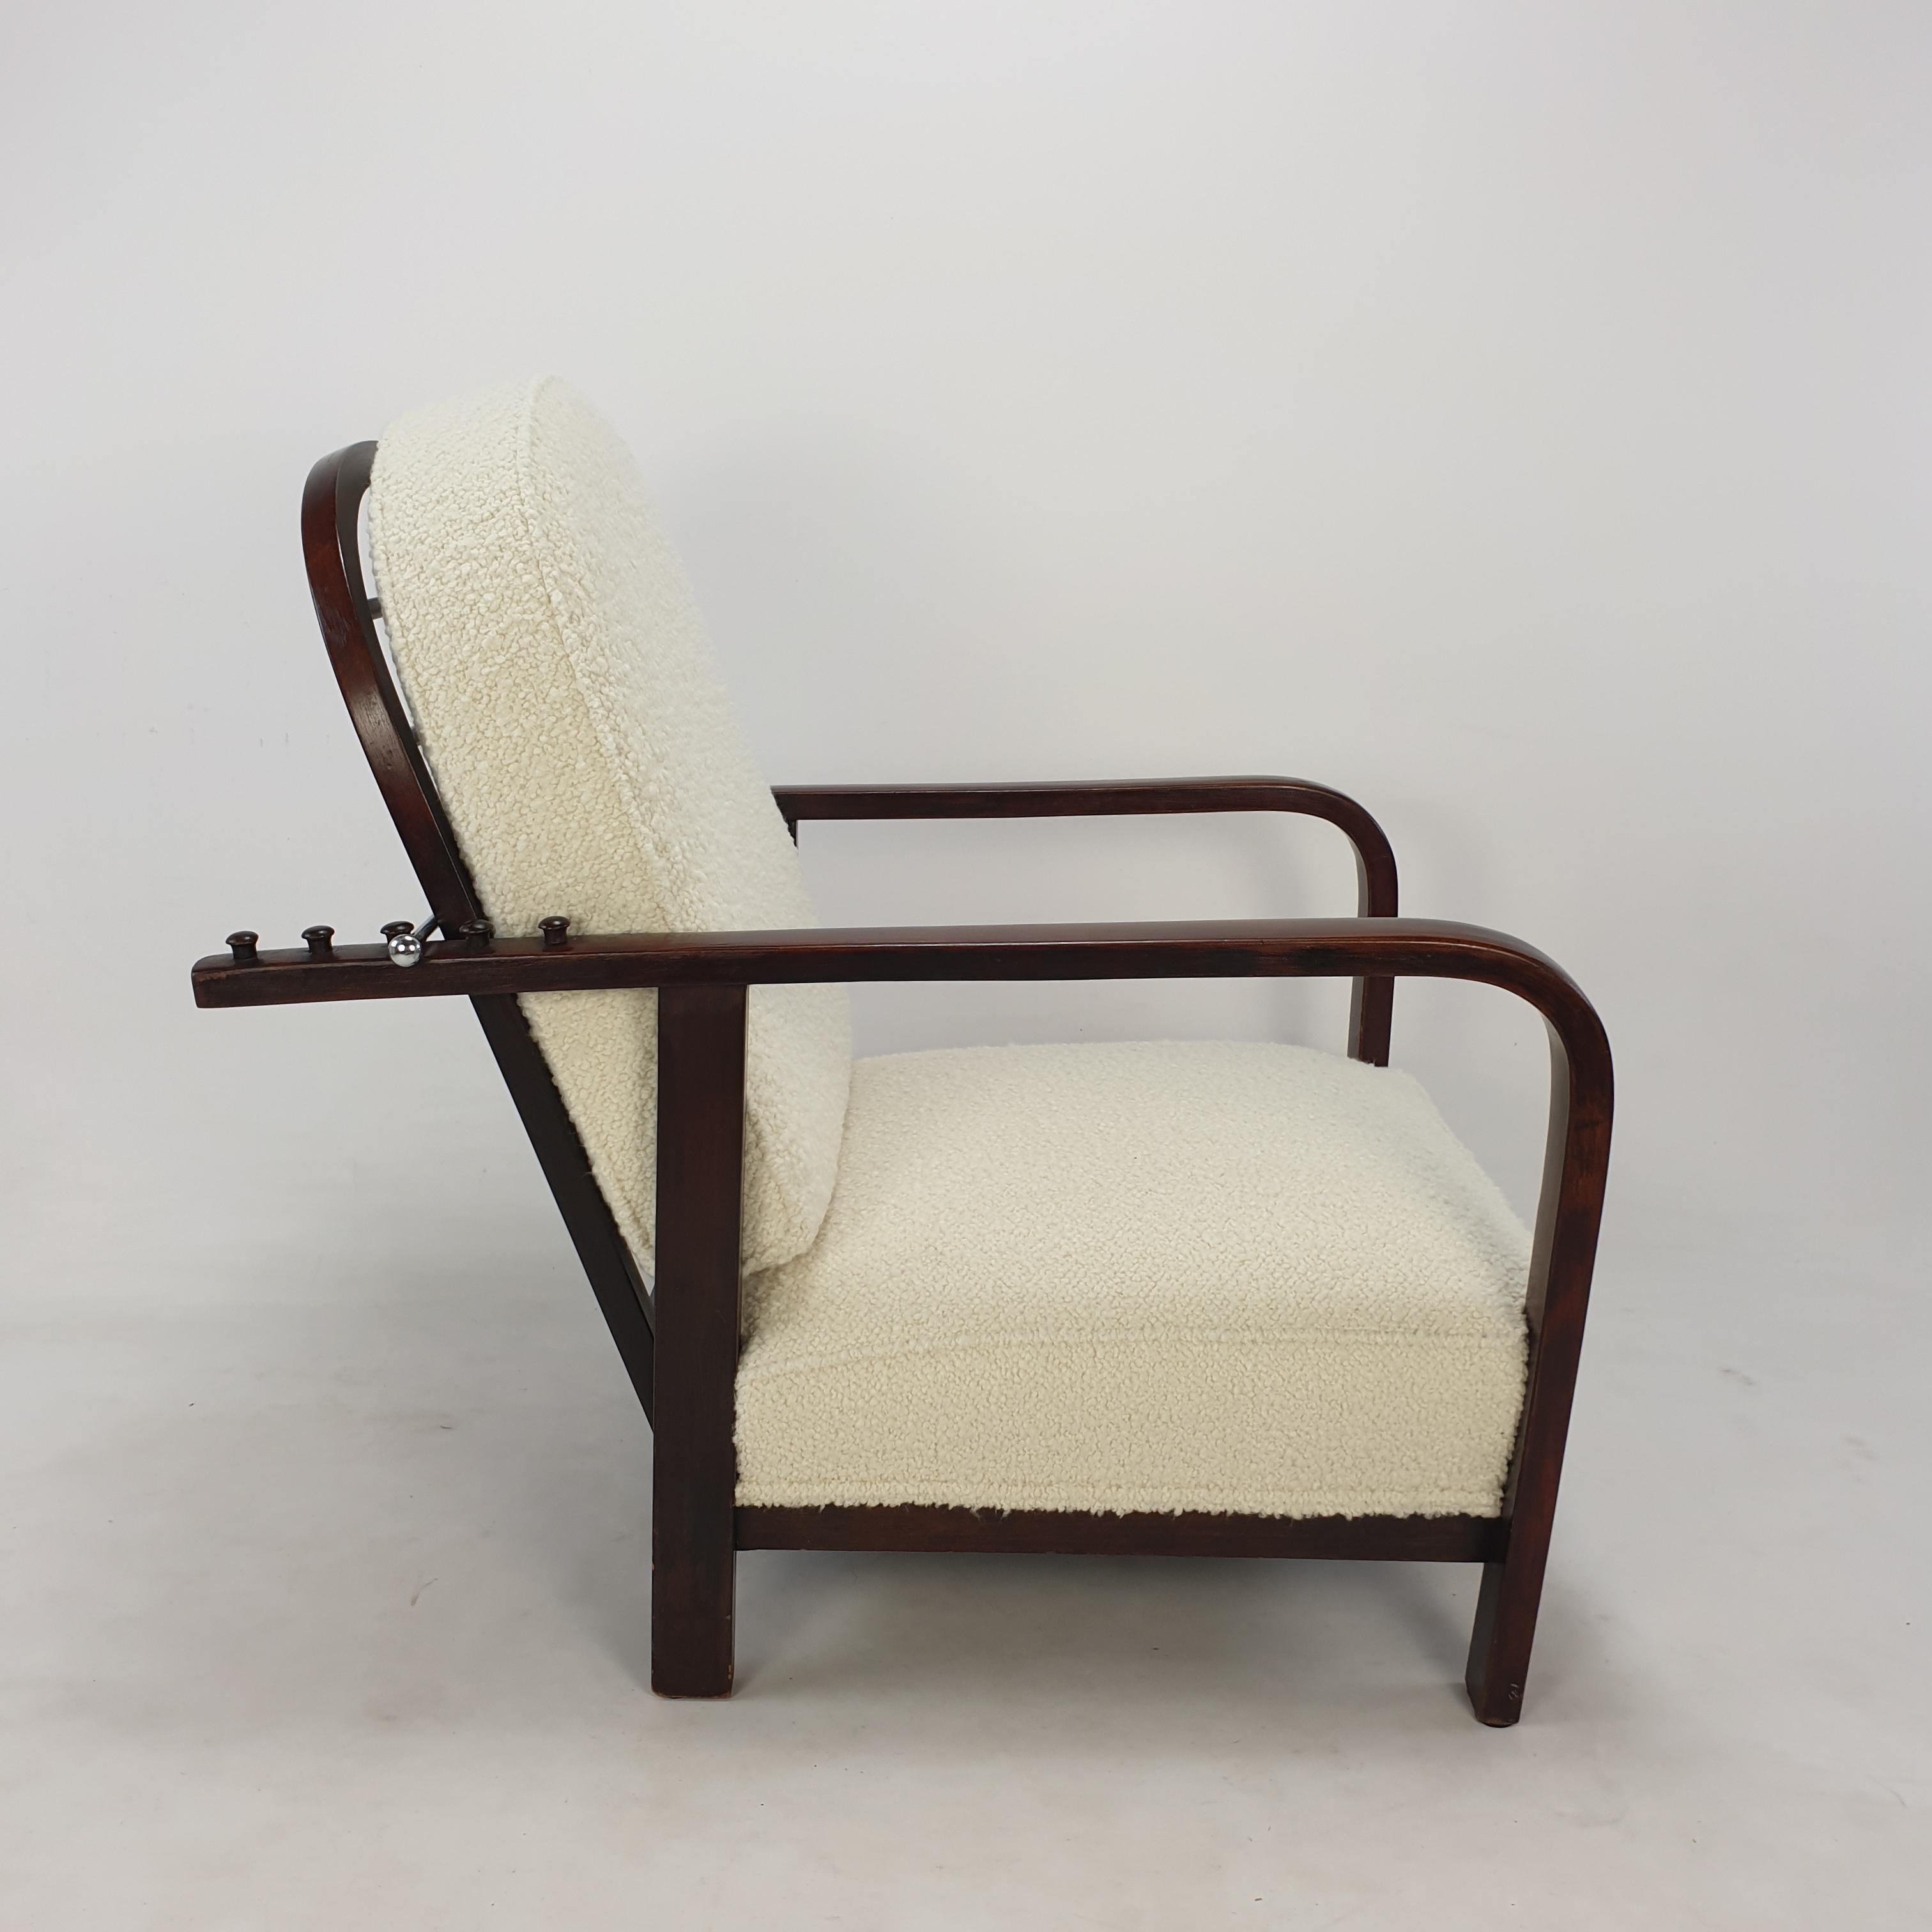 Pair of Adjustable Lounge Chairs by Thonet, 1930's For Sale 5